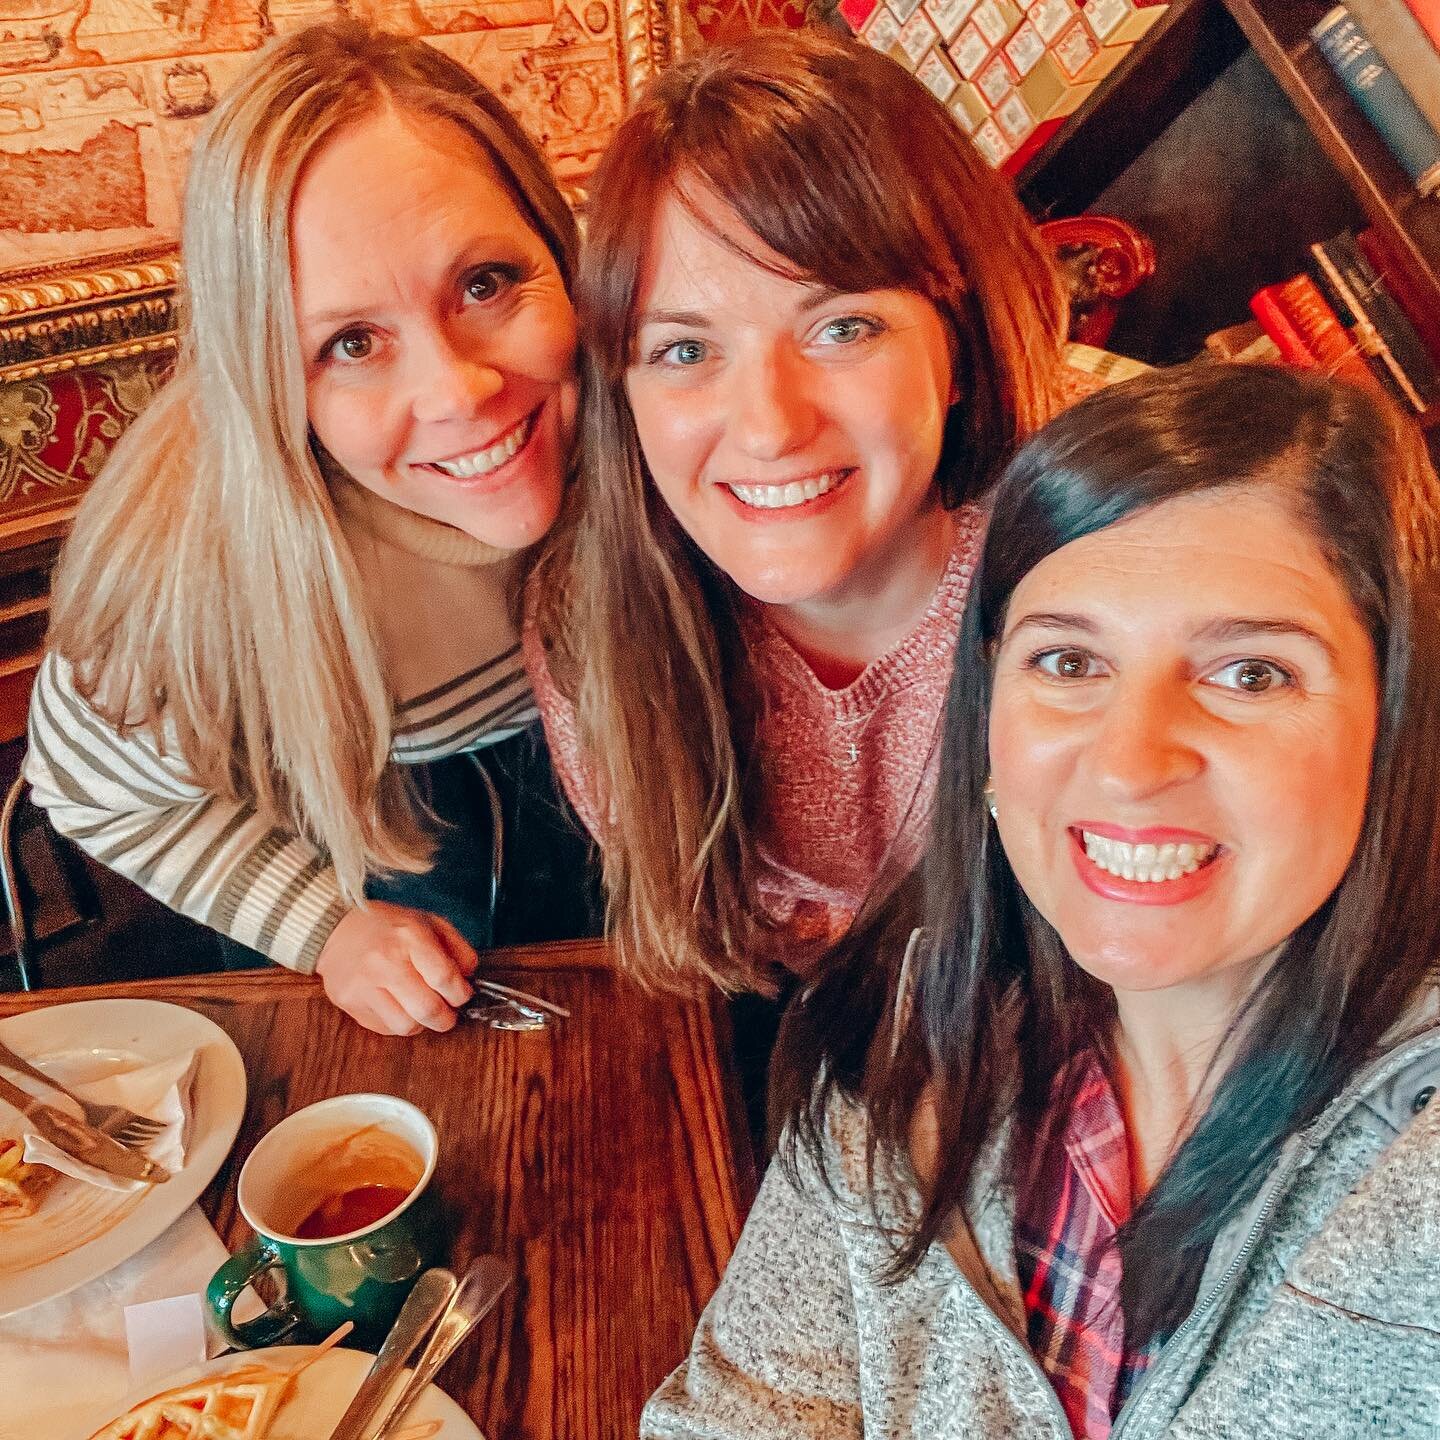 Thank you so much for all the sweet birthday calls, texts, messages and love yesterday🥰❤️! I had lunch with two of my best friends (@ashleymcwhorter and @erinljohnson ) and then cheered on our team and girls at a cold and wet football game in the bi